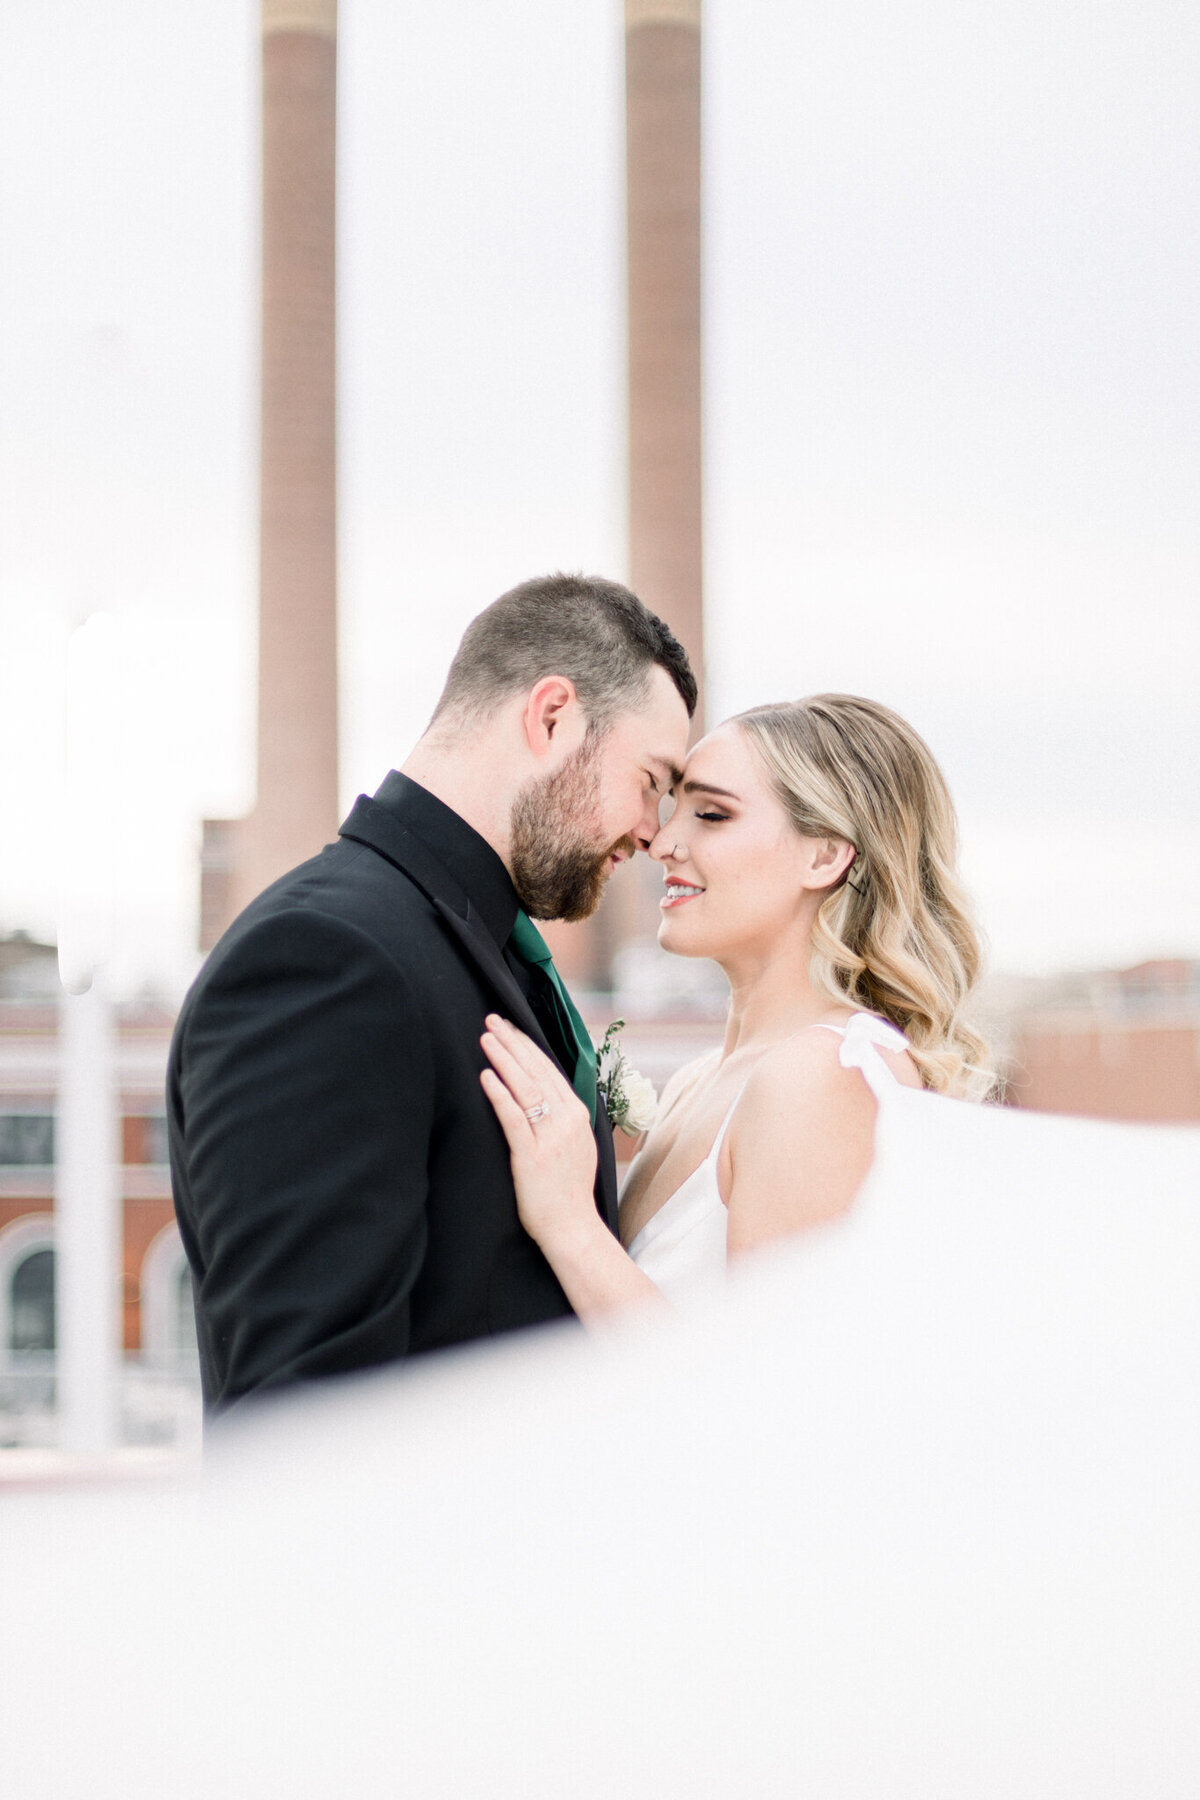 Bride and groom smiling at each other in love on an rooftop in Spokane WA- taken by spokane wedding photographer